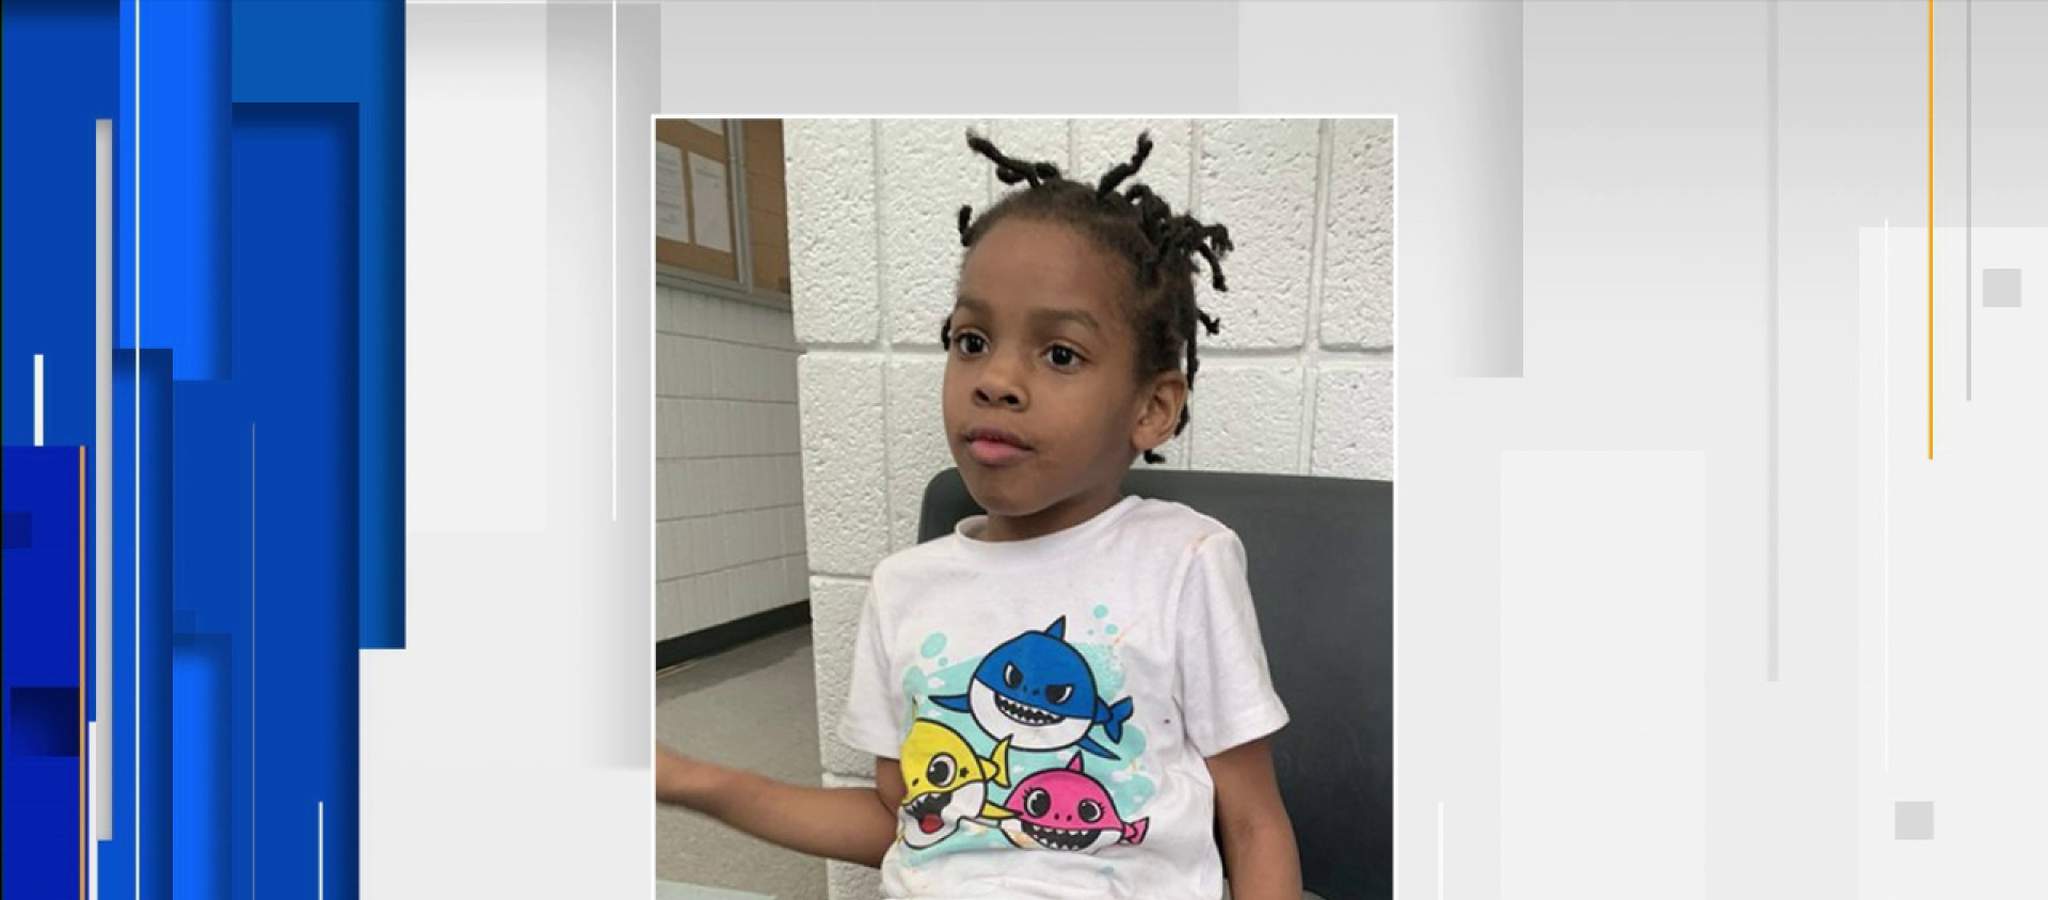 Mother located after a missing girl was found alone in Lauderdale Lakes